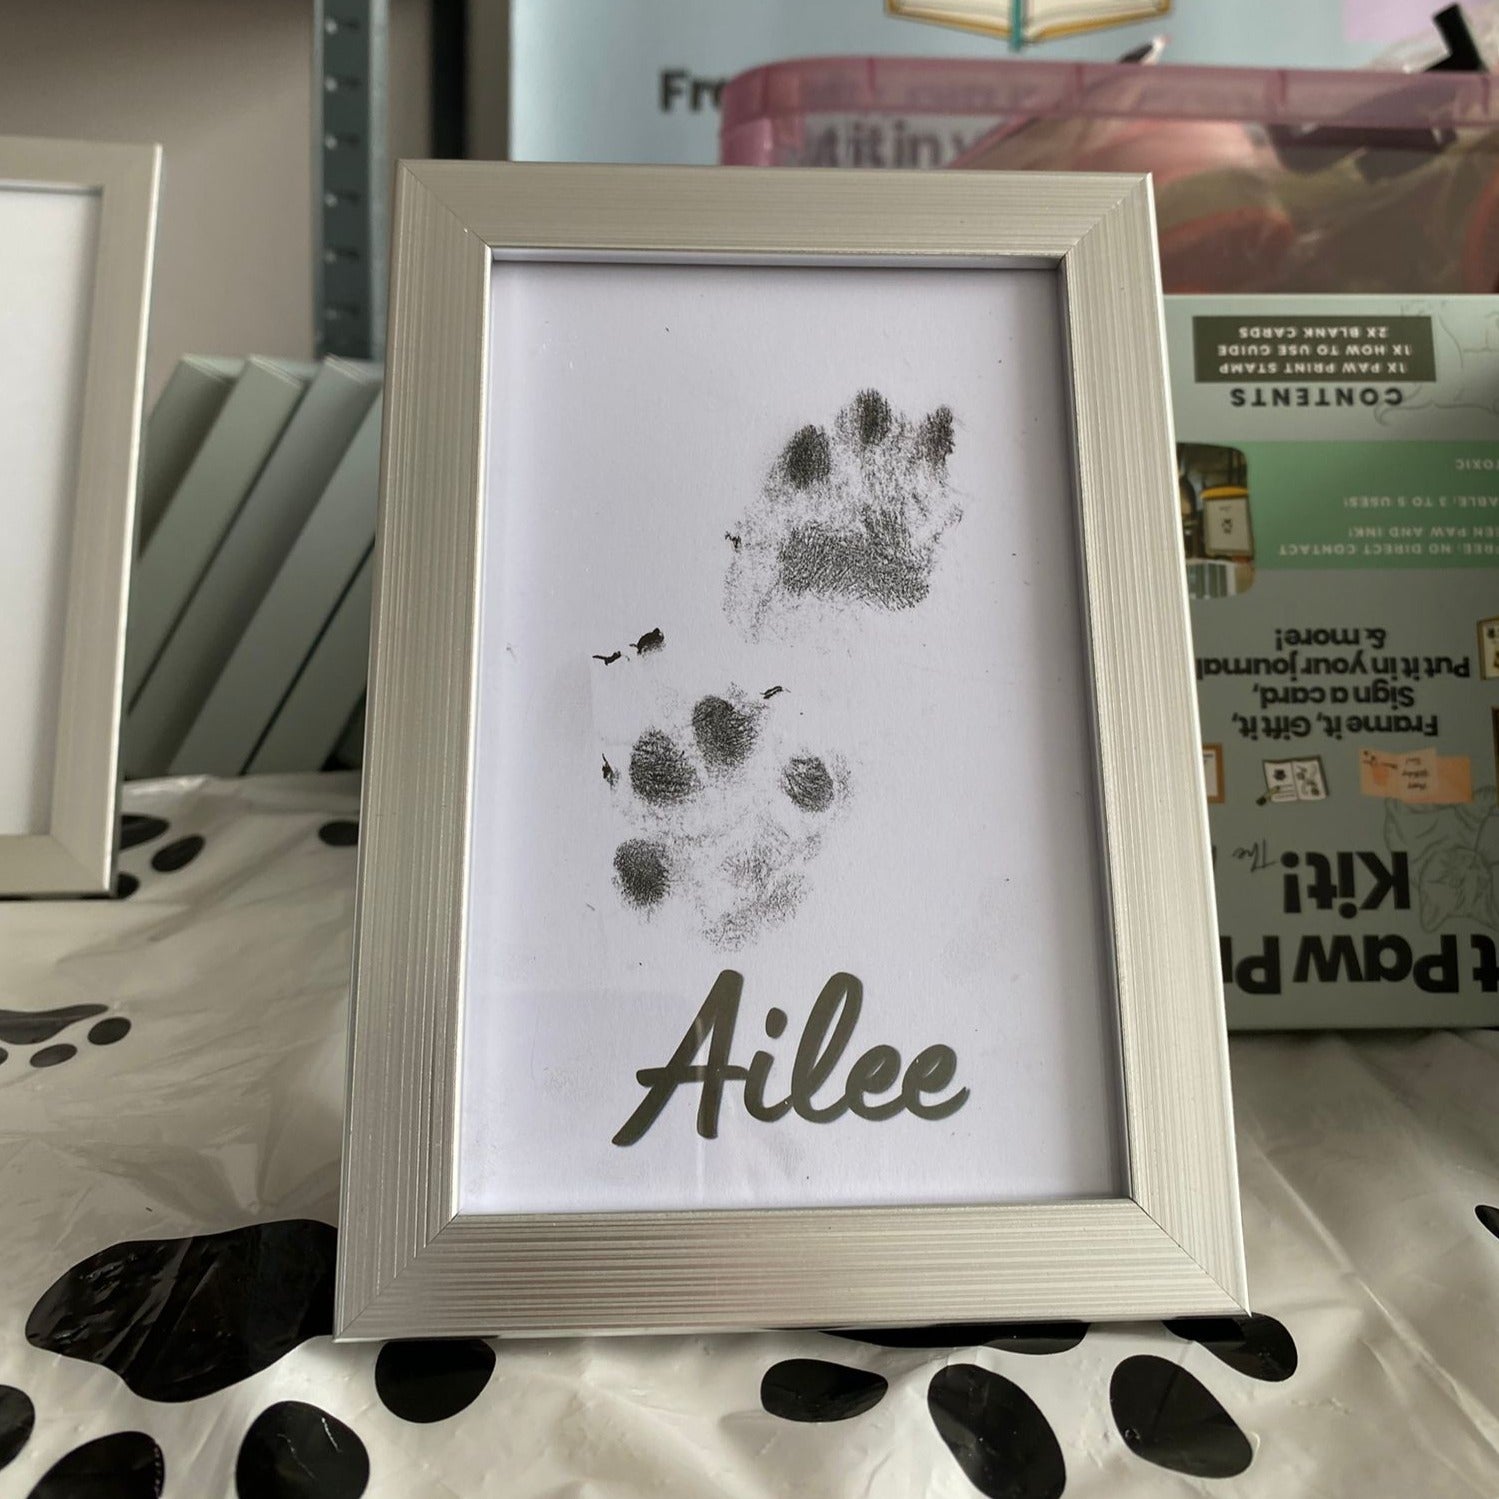  Paw Prints, Blue, Pawprints, Paws, Dog, Puppy, Pup, Mutt,  Canine, Print, Car, Auto, Wall, Locker, Laptop, Notebook, Netbook, Vinyl,  Sticker, Decal, Label, Placard, (Blue) : Tools & Home Improvement